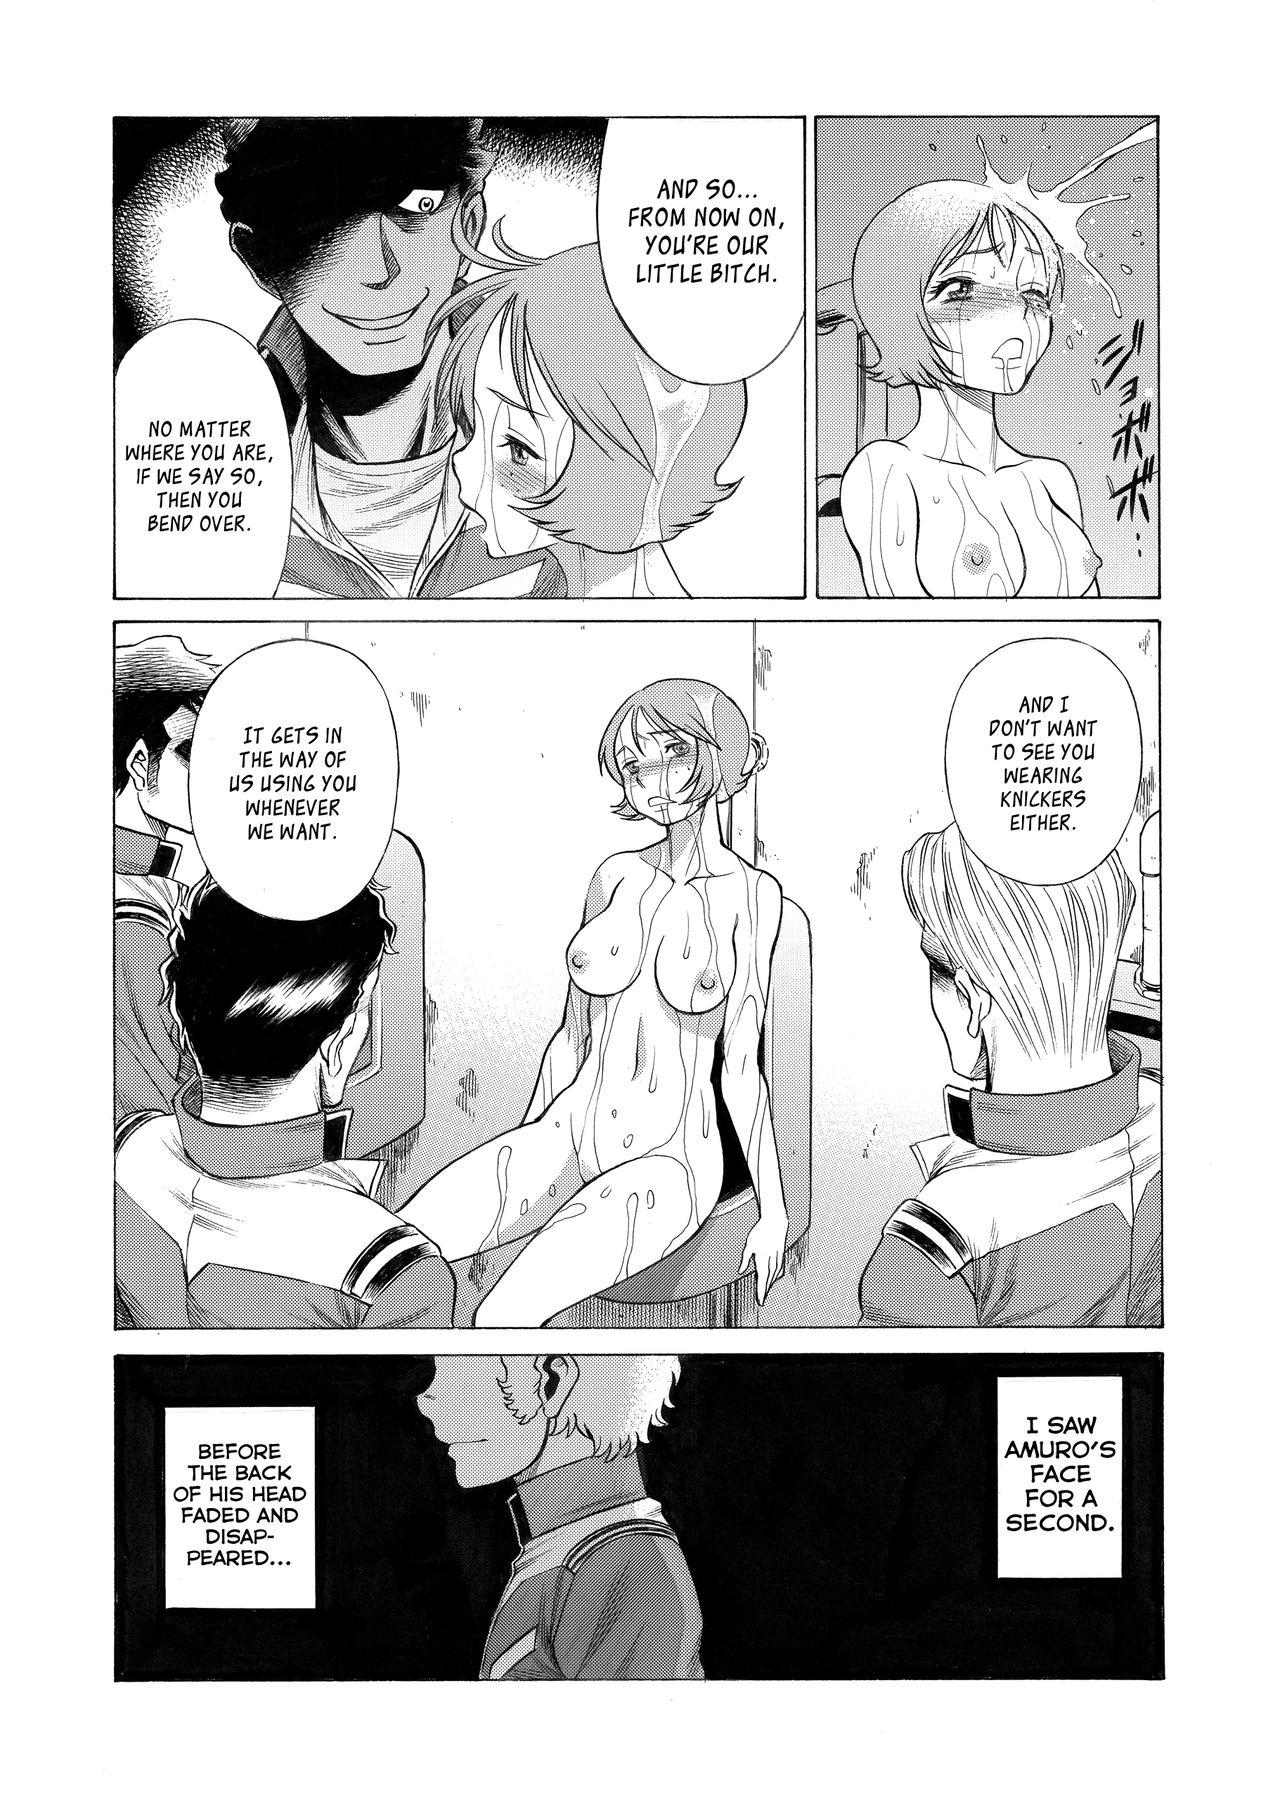 Jerking Off Reijoh | Slave Girl - Mobile suit gundam Woman - Page 7